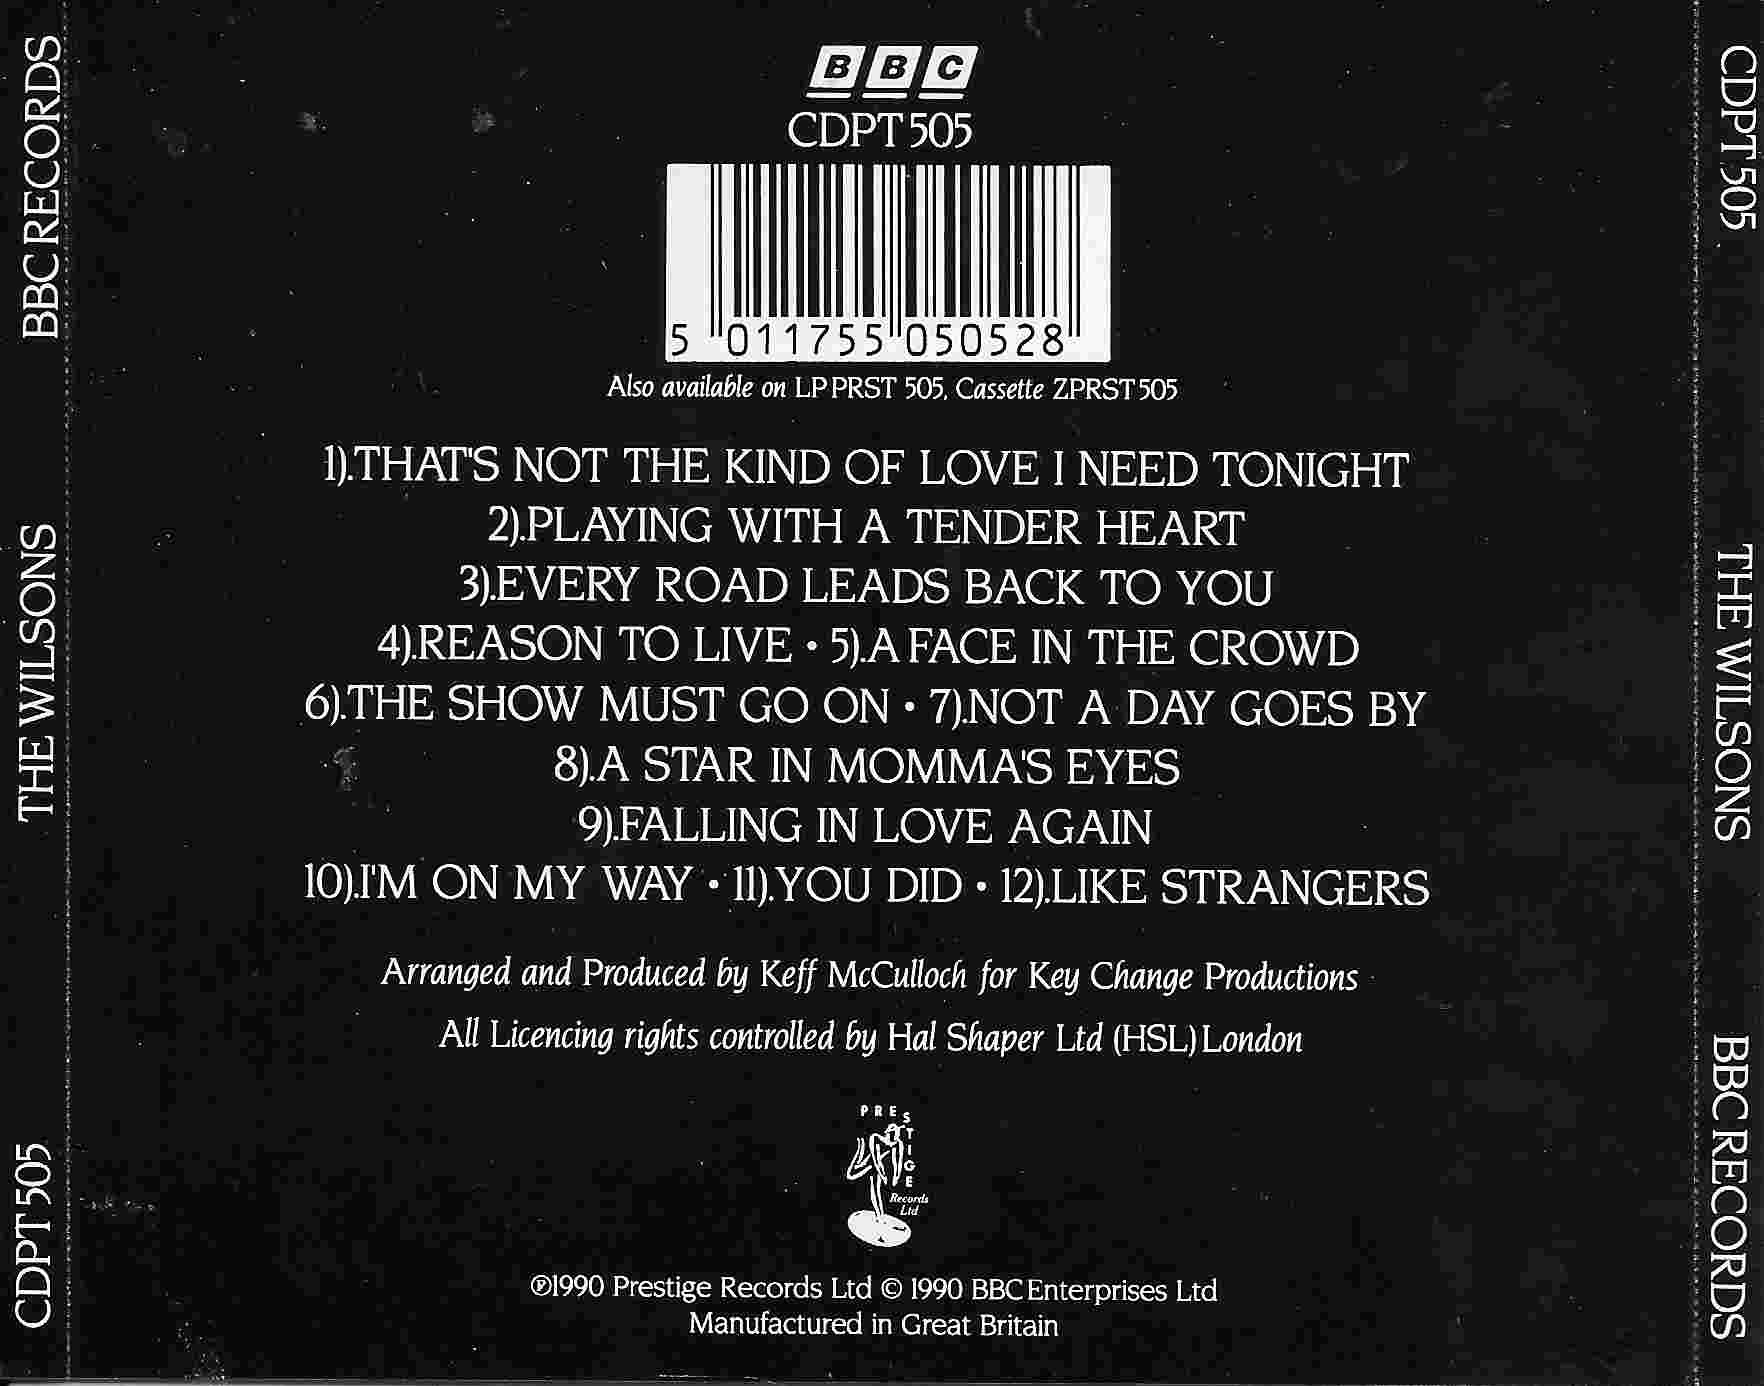 Back cover of CDPT 505